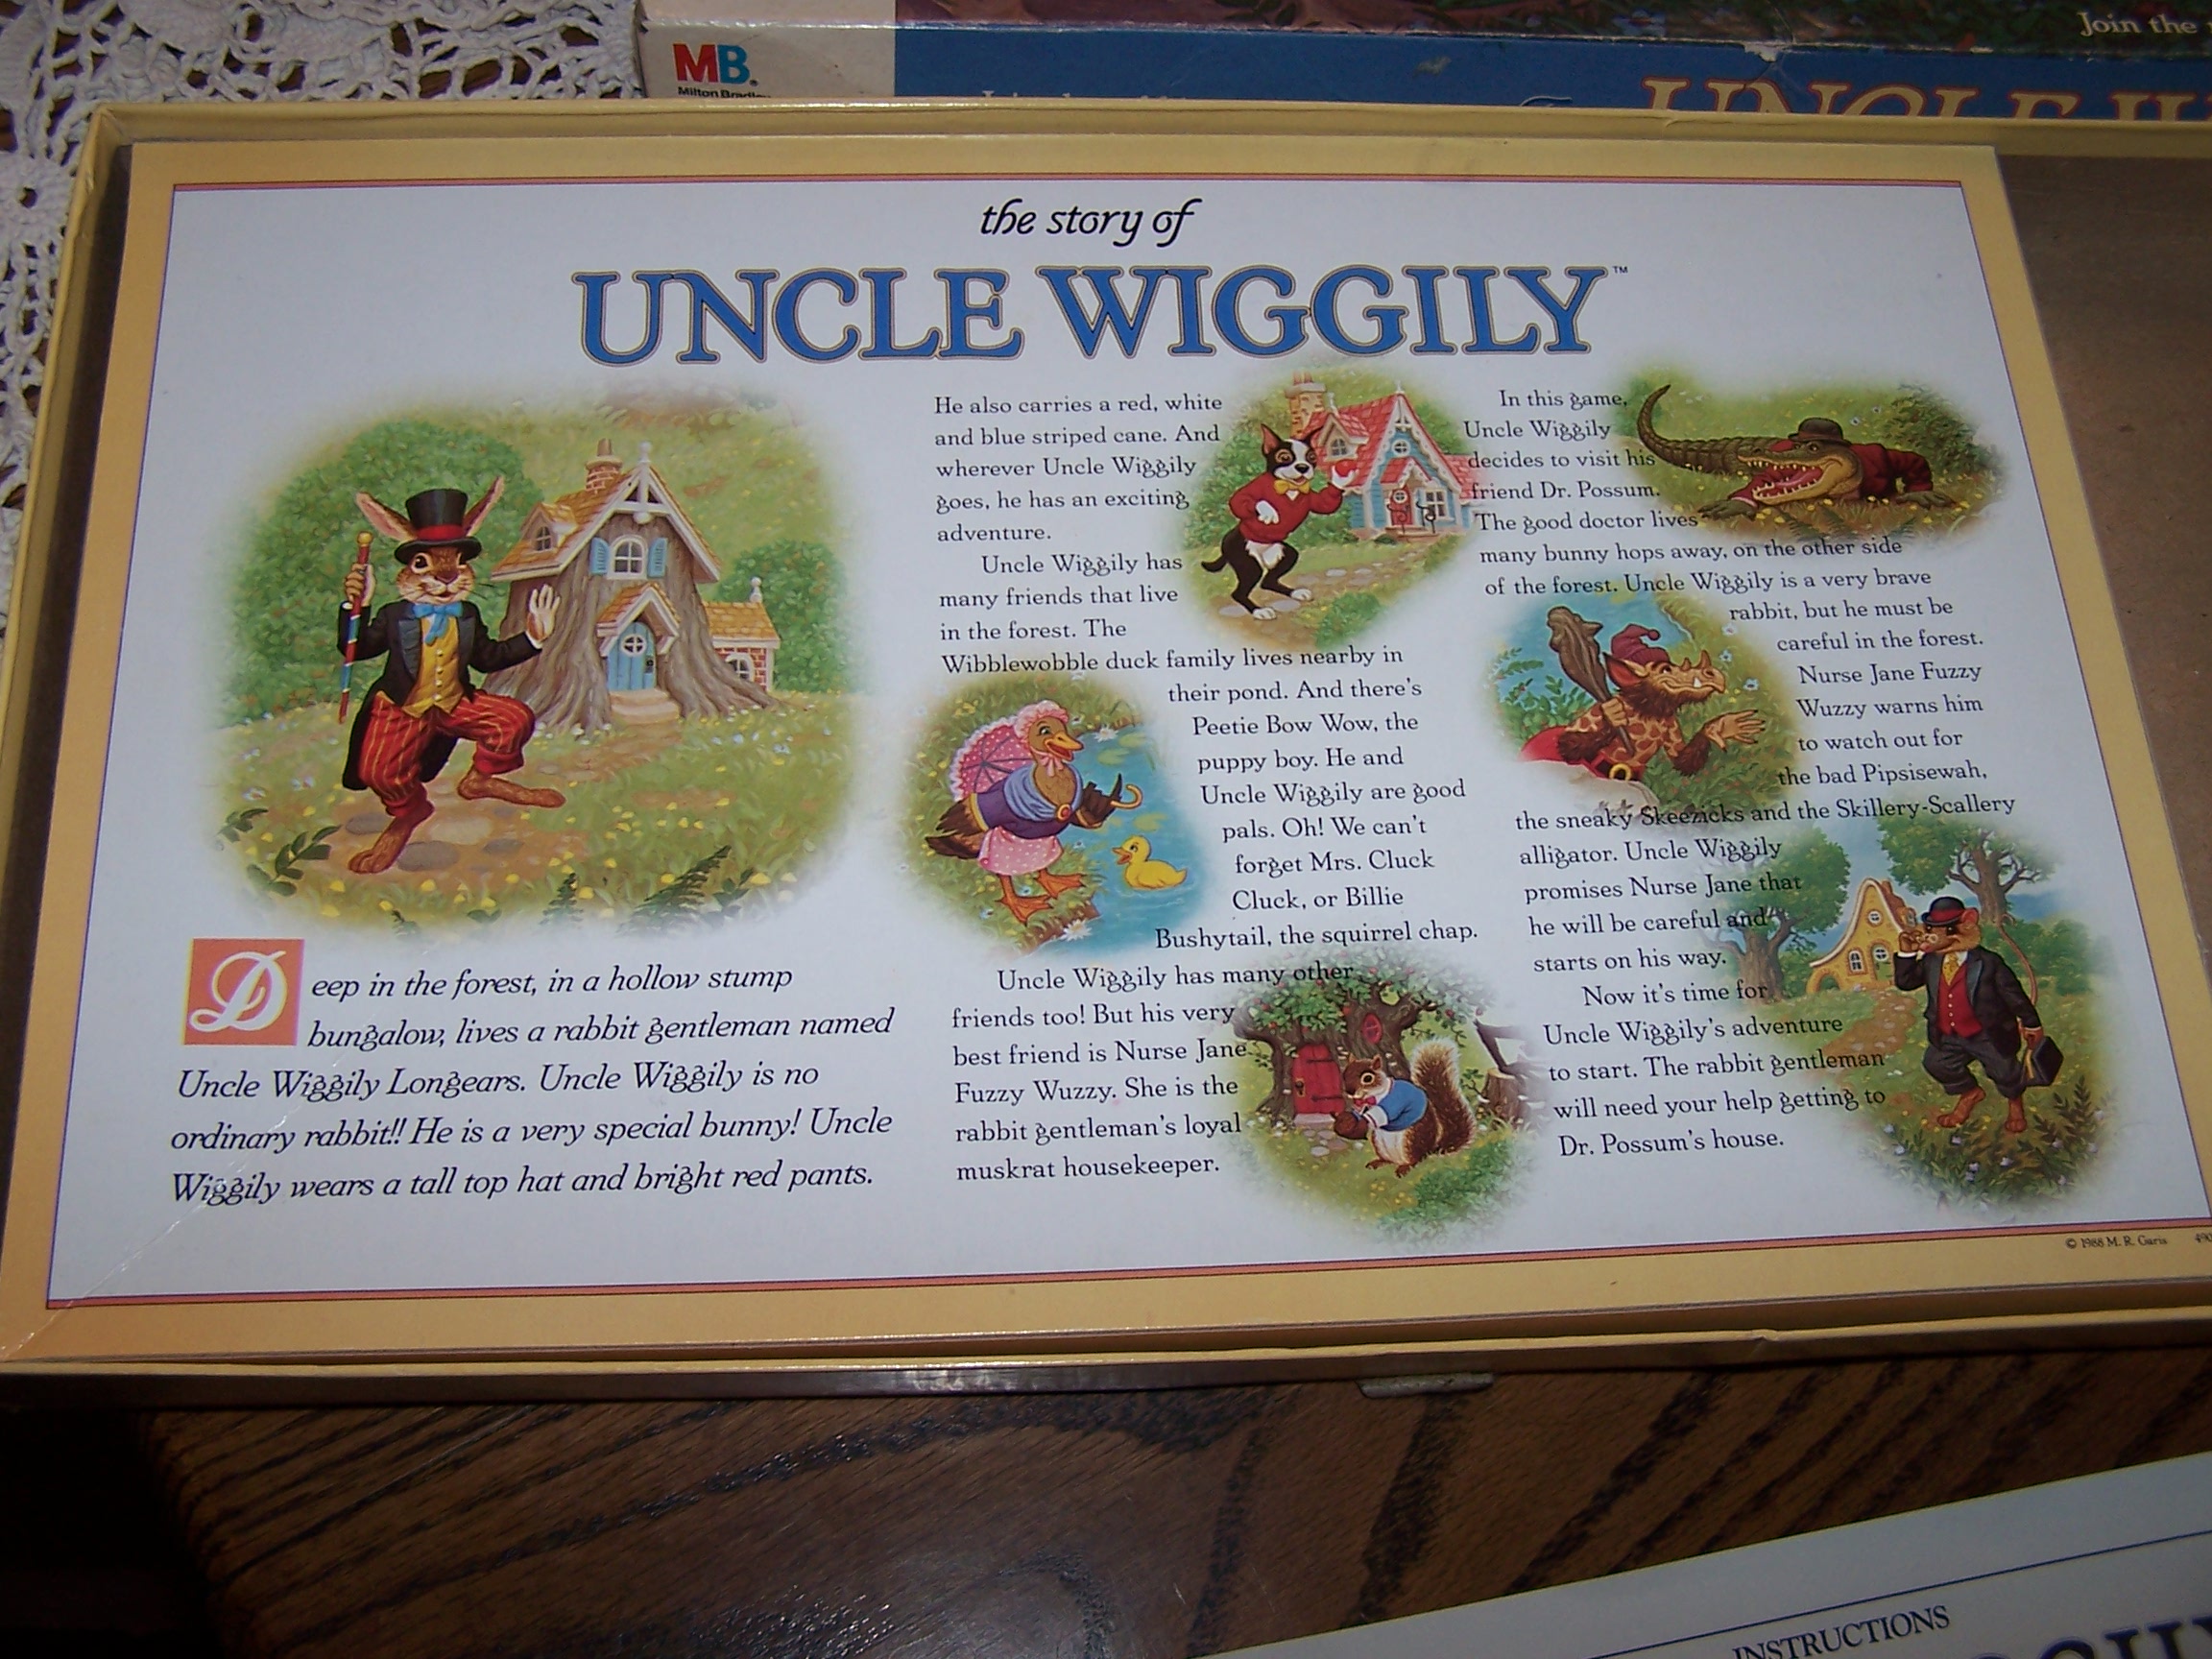 Storyboard about Uncle Wiggily